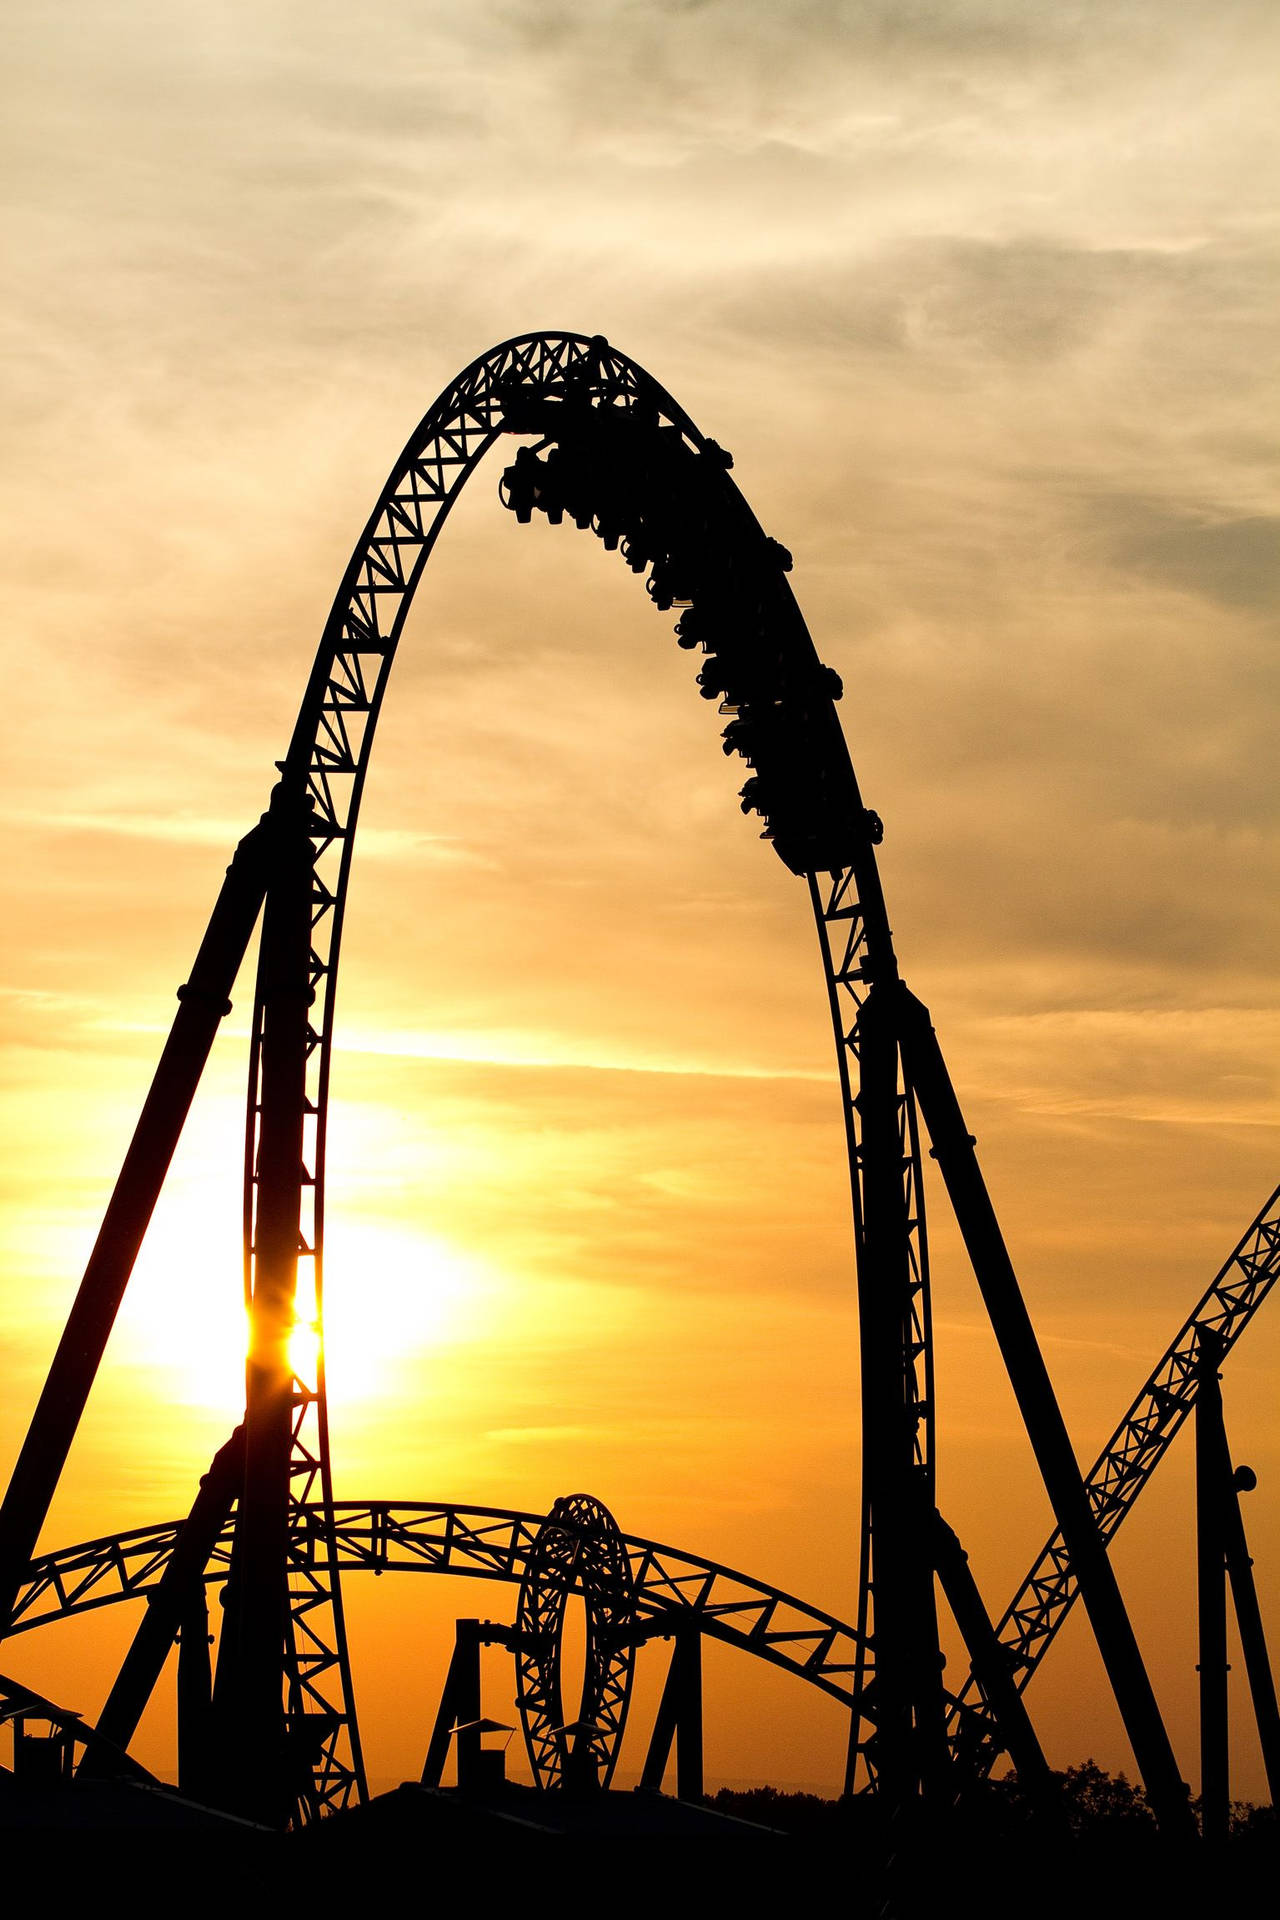 Captivating Silhouette Of Arching Roller Coaster